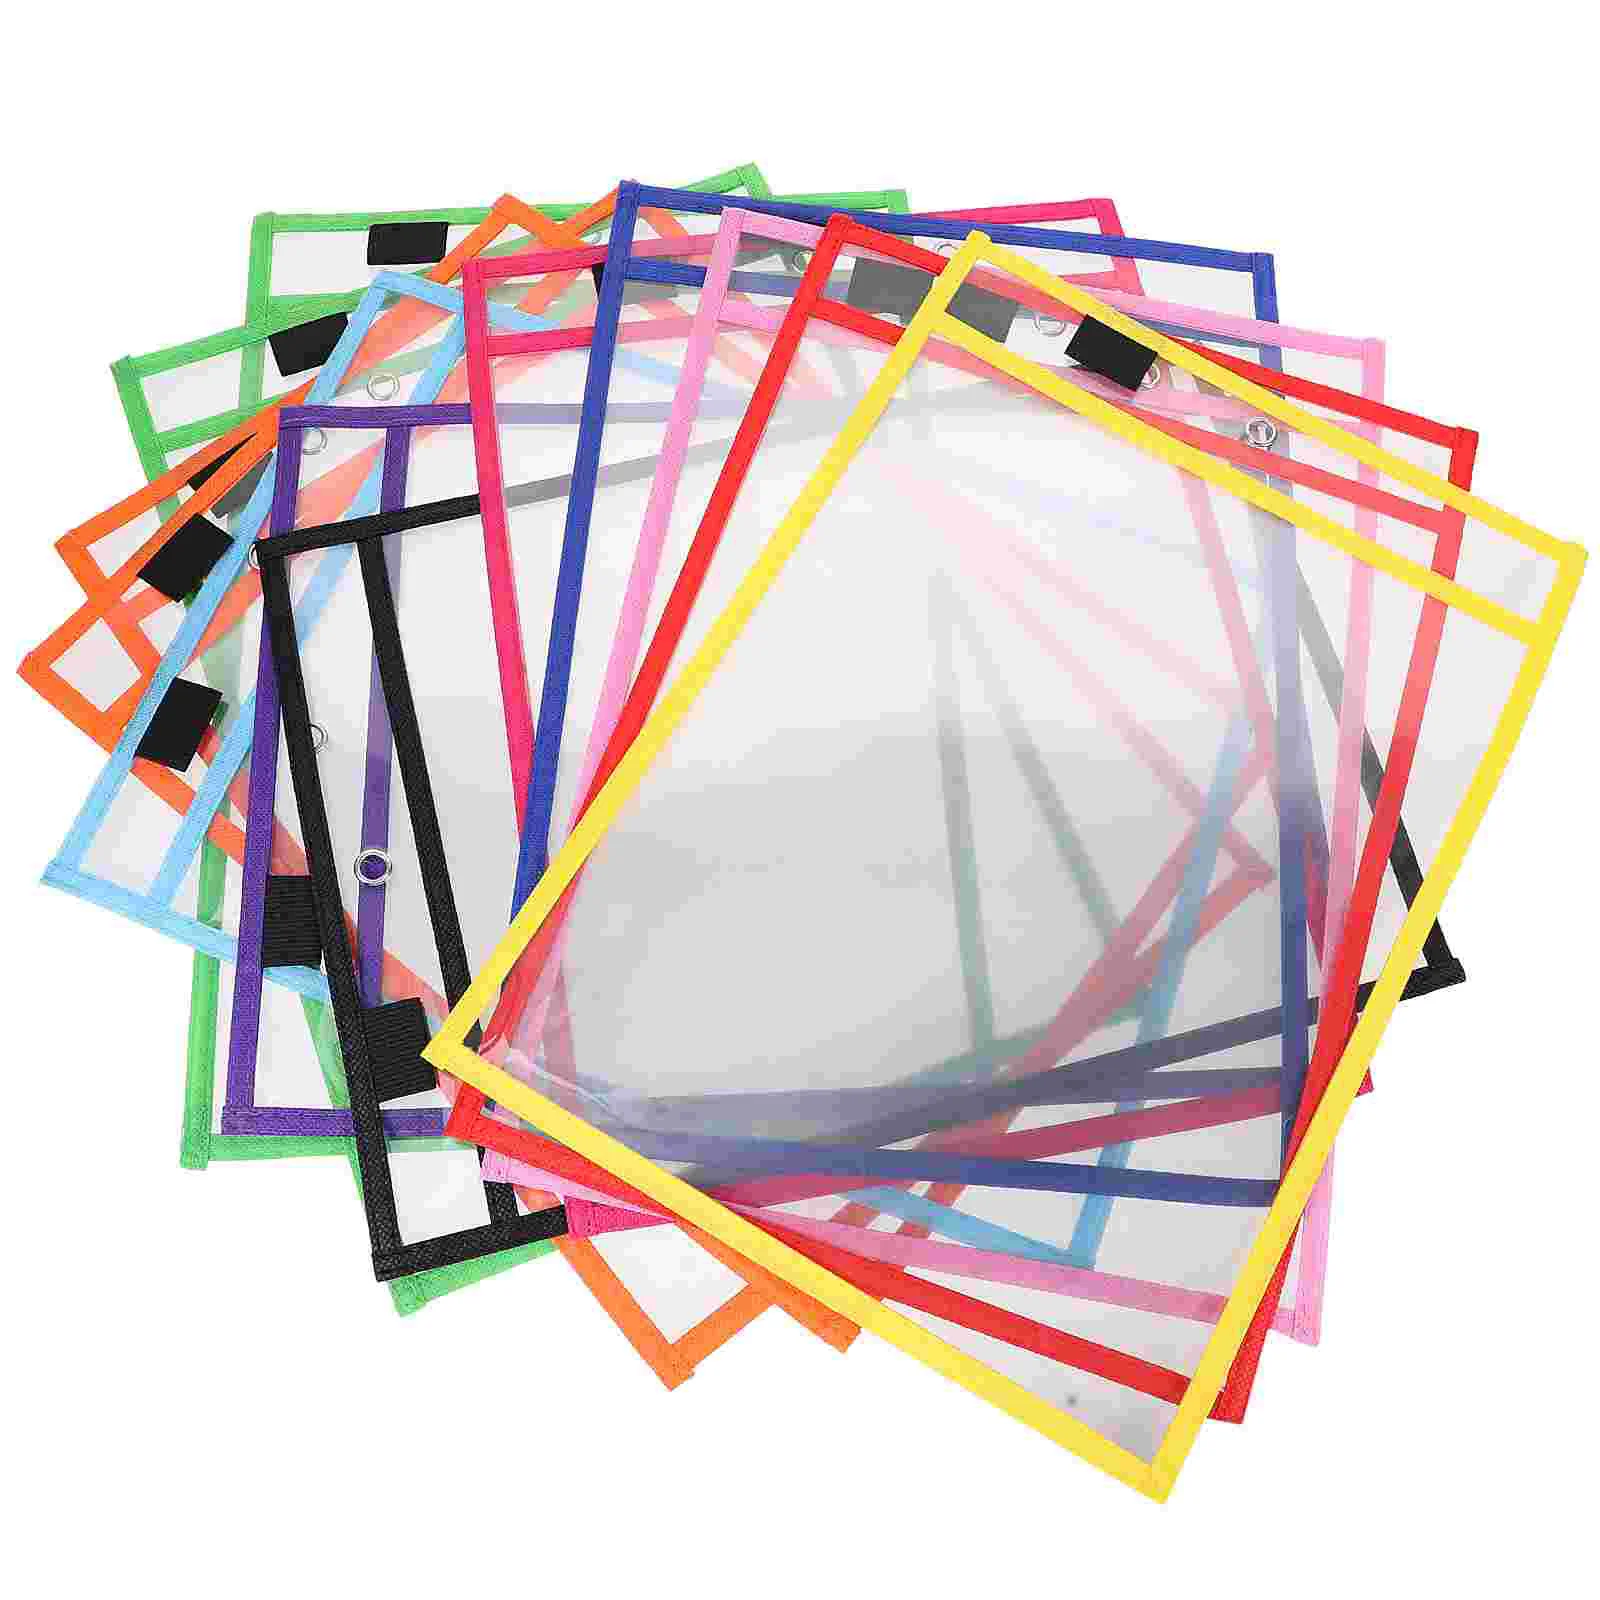 

Dry Erase Pockets Reusable Sleeves with Marker Pen Holder Pocket Sleeves 12pcs for School Office Plastic covers write and